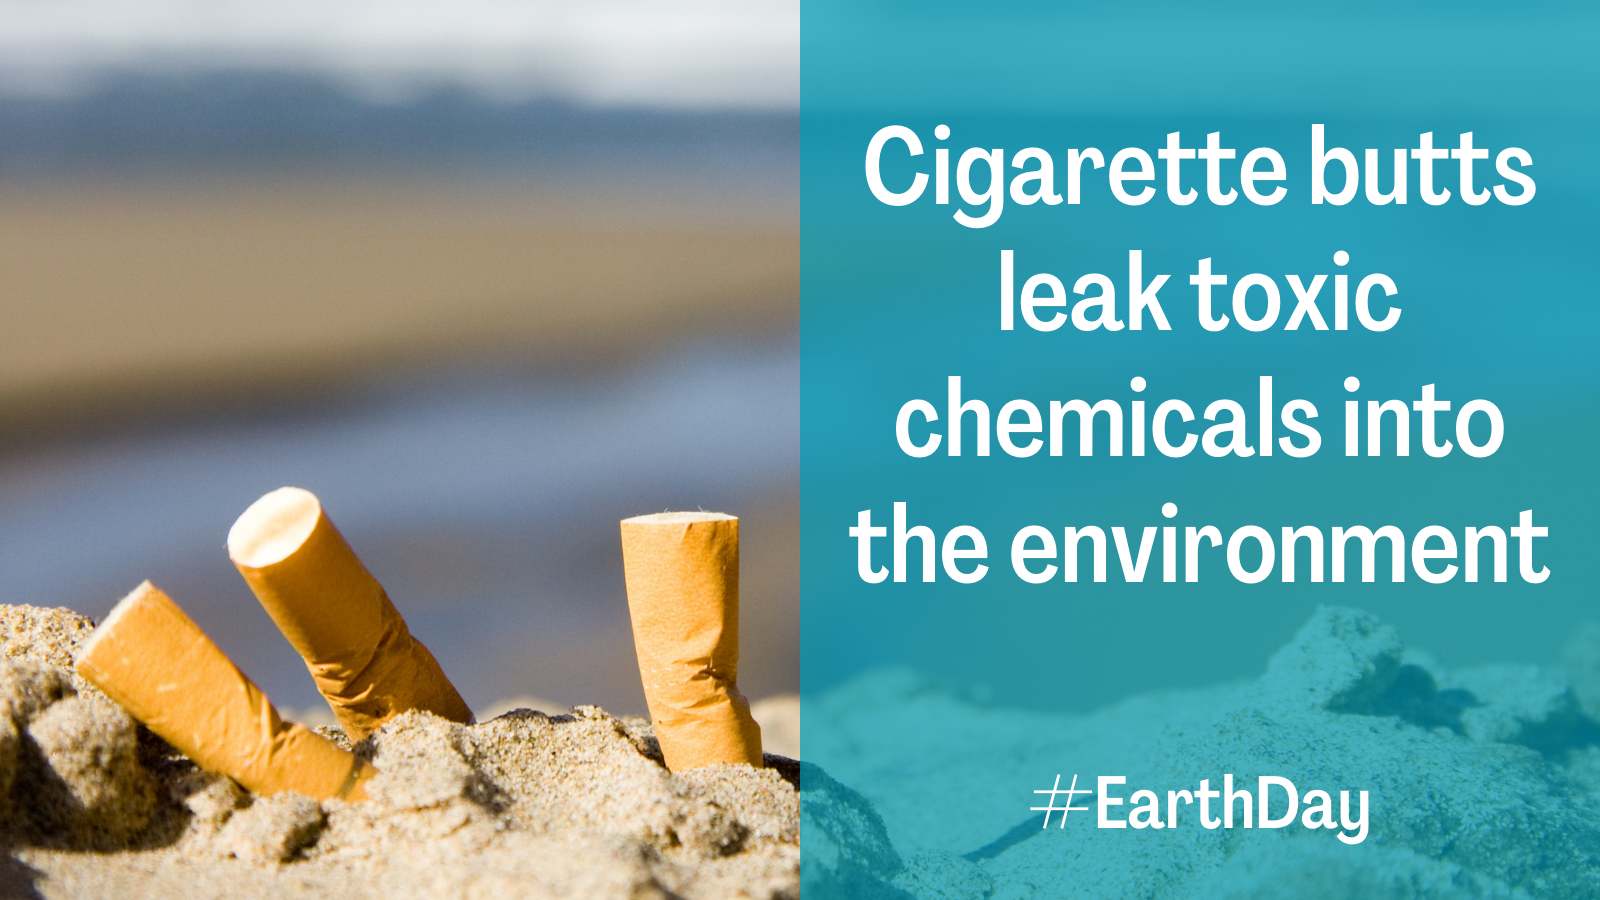 Cigarette butts leak toxic chemicals into the environment #EarthDay